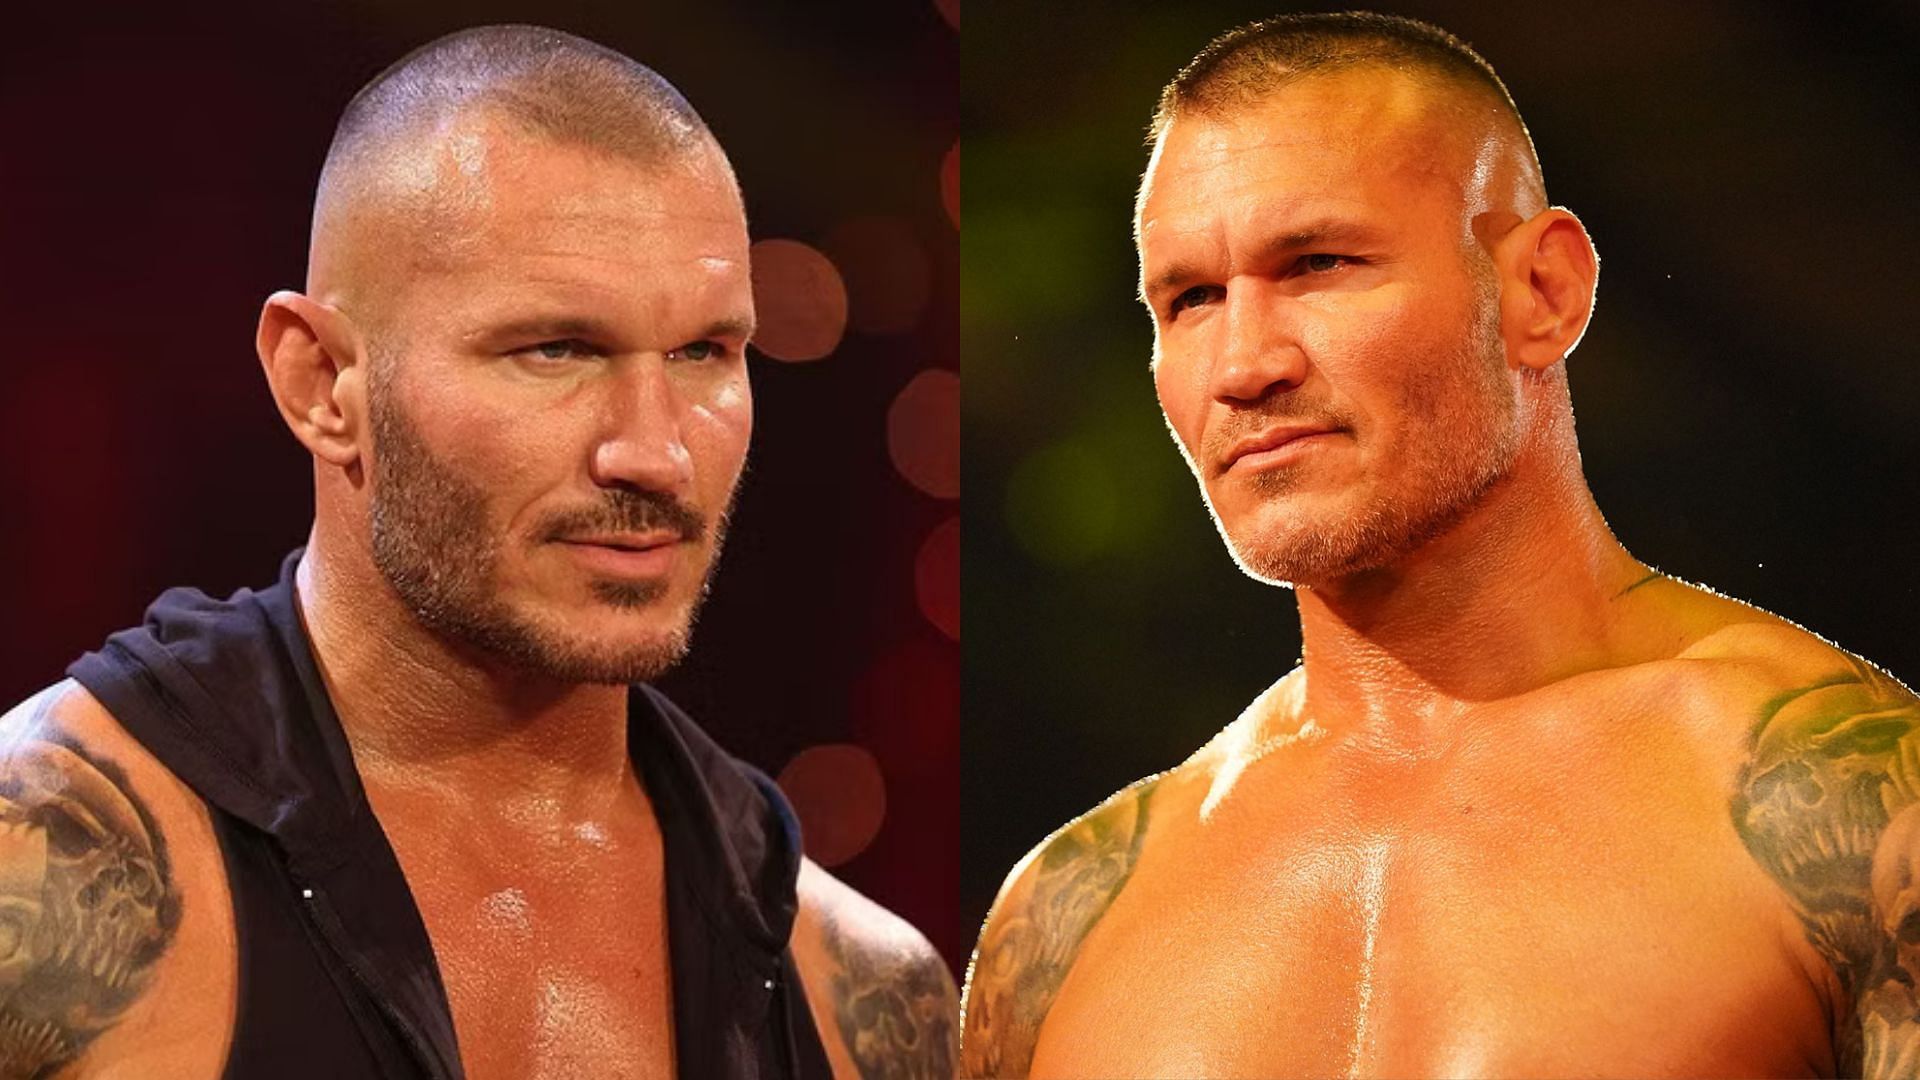 Orton has been out of action since last year.